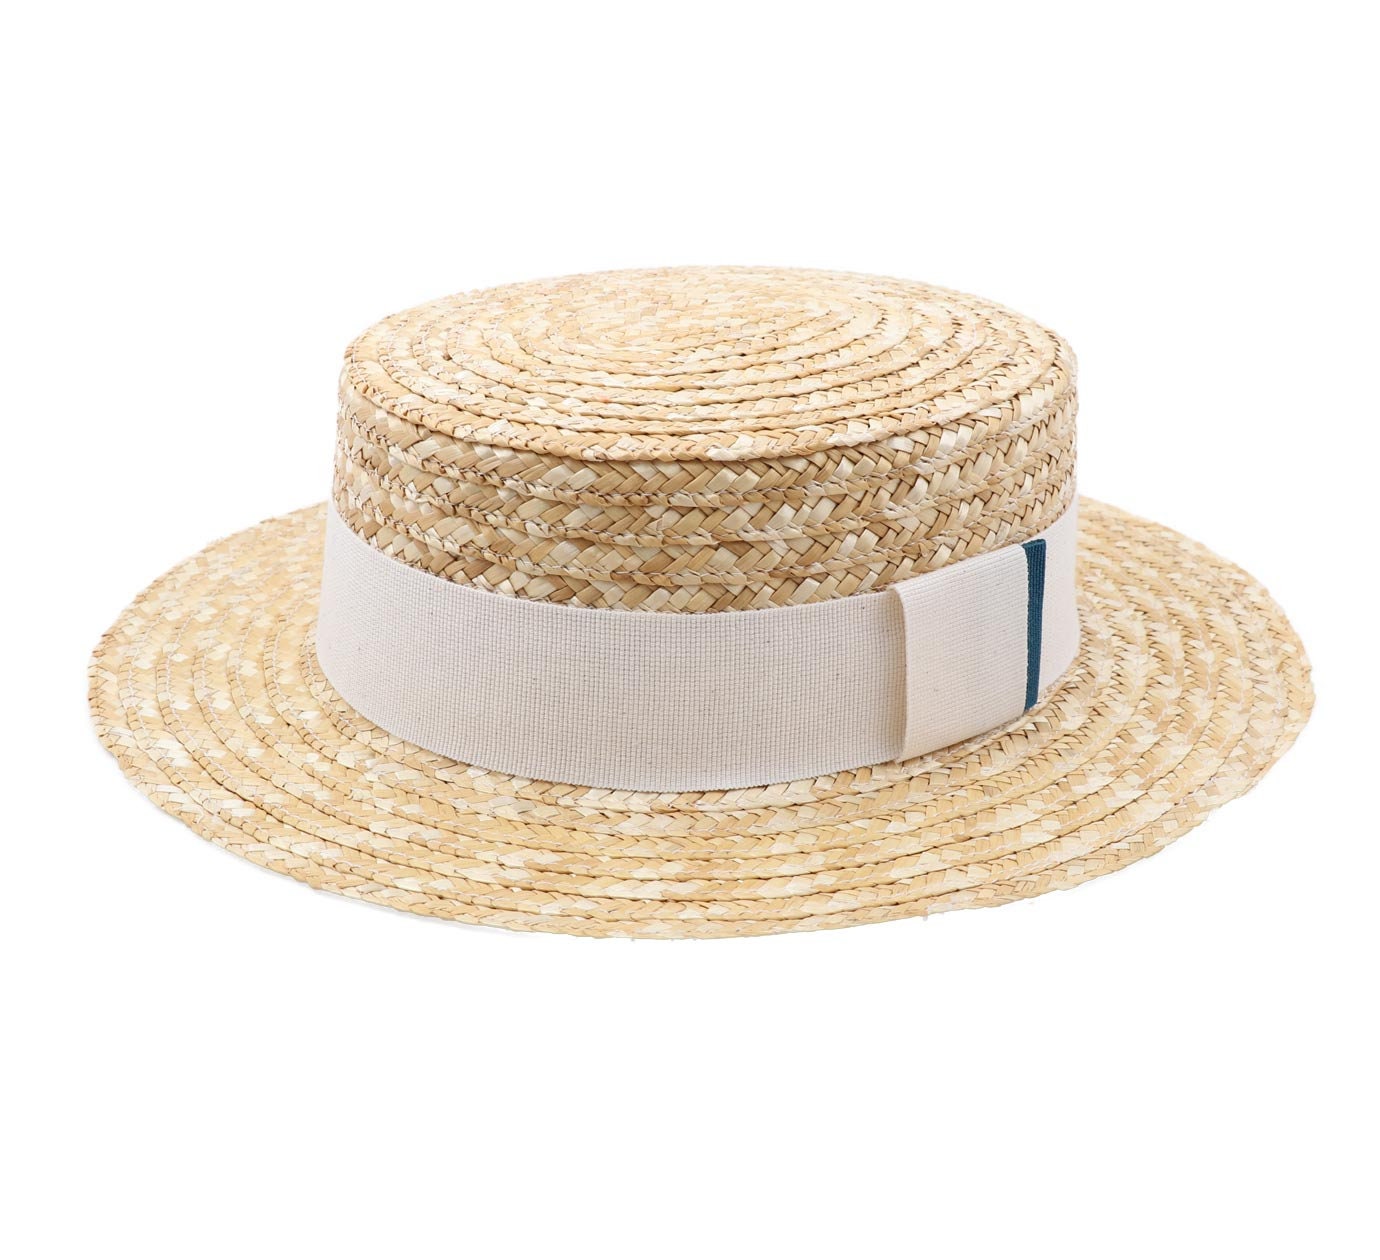 women's men's Accessories Hats & Caps Boaters & Panama Hats Boater Biarritz Straw Hat Sun and summer hat 